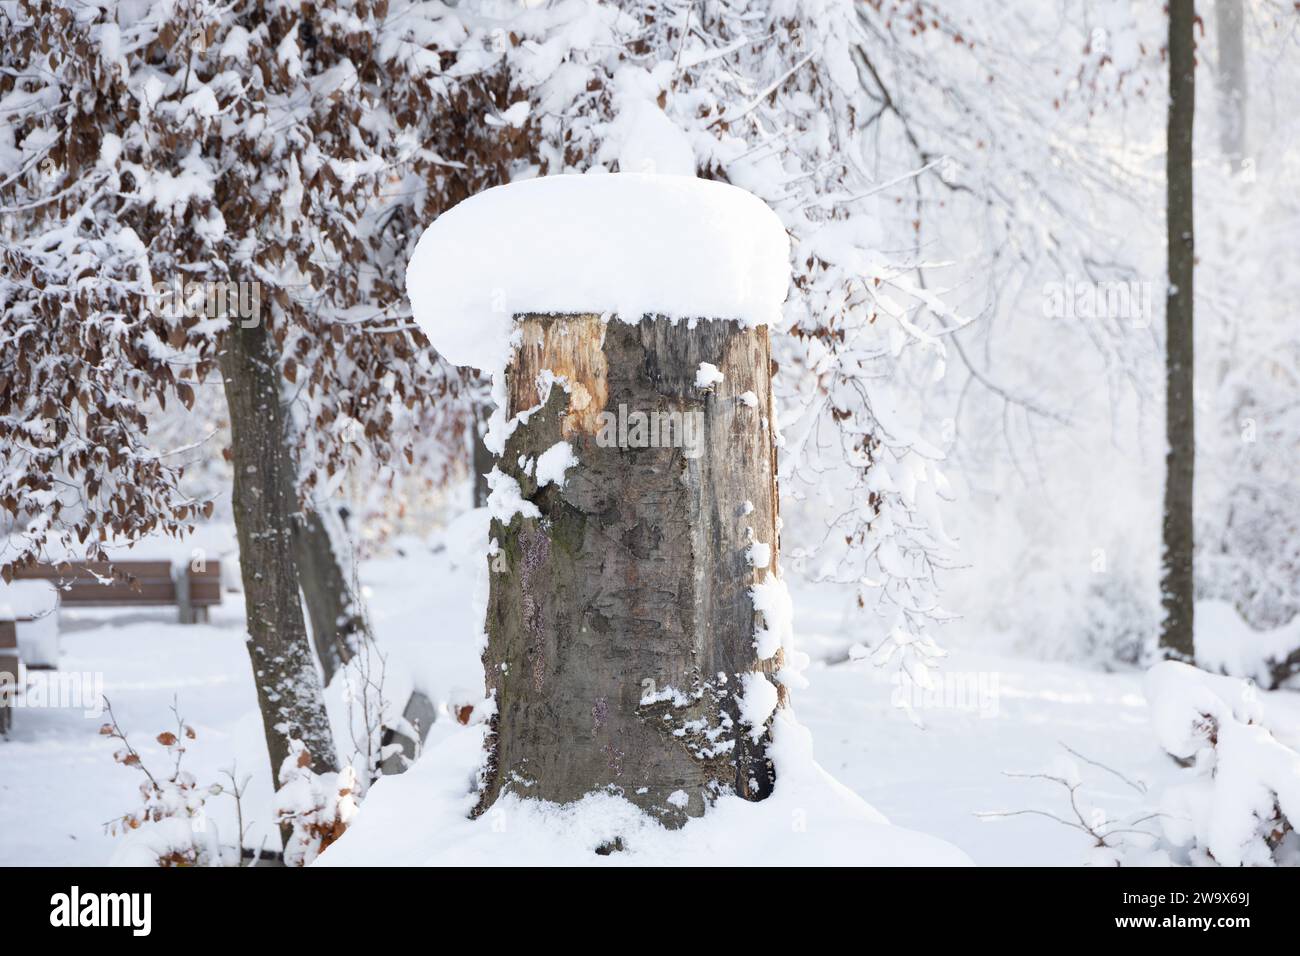 Winter Whispers: Snow on a Tree Stump, First Snow Stock Photo